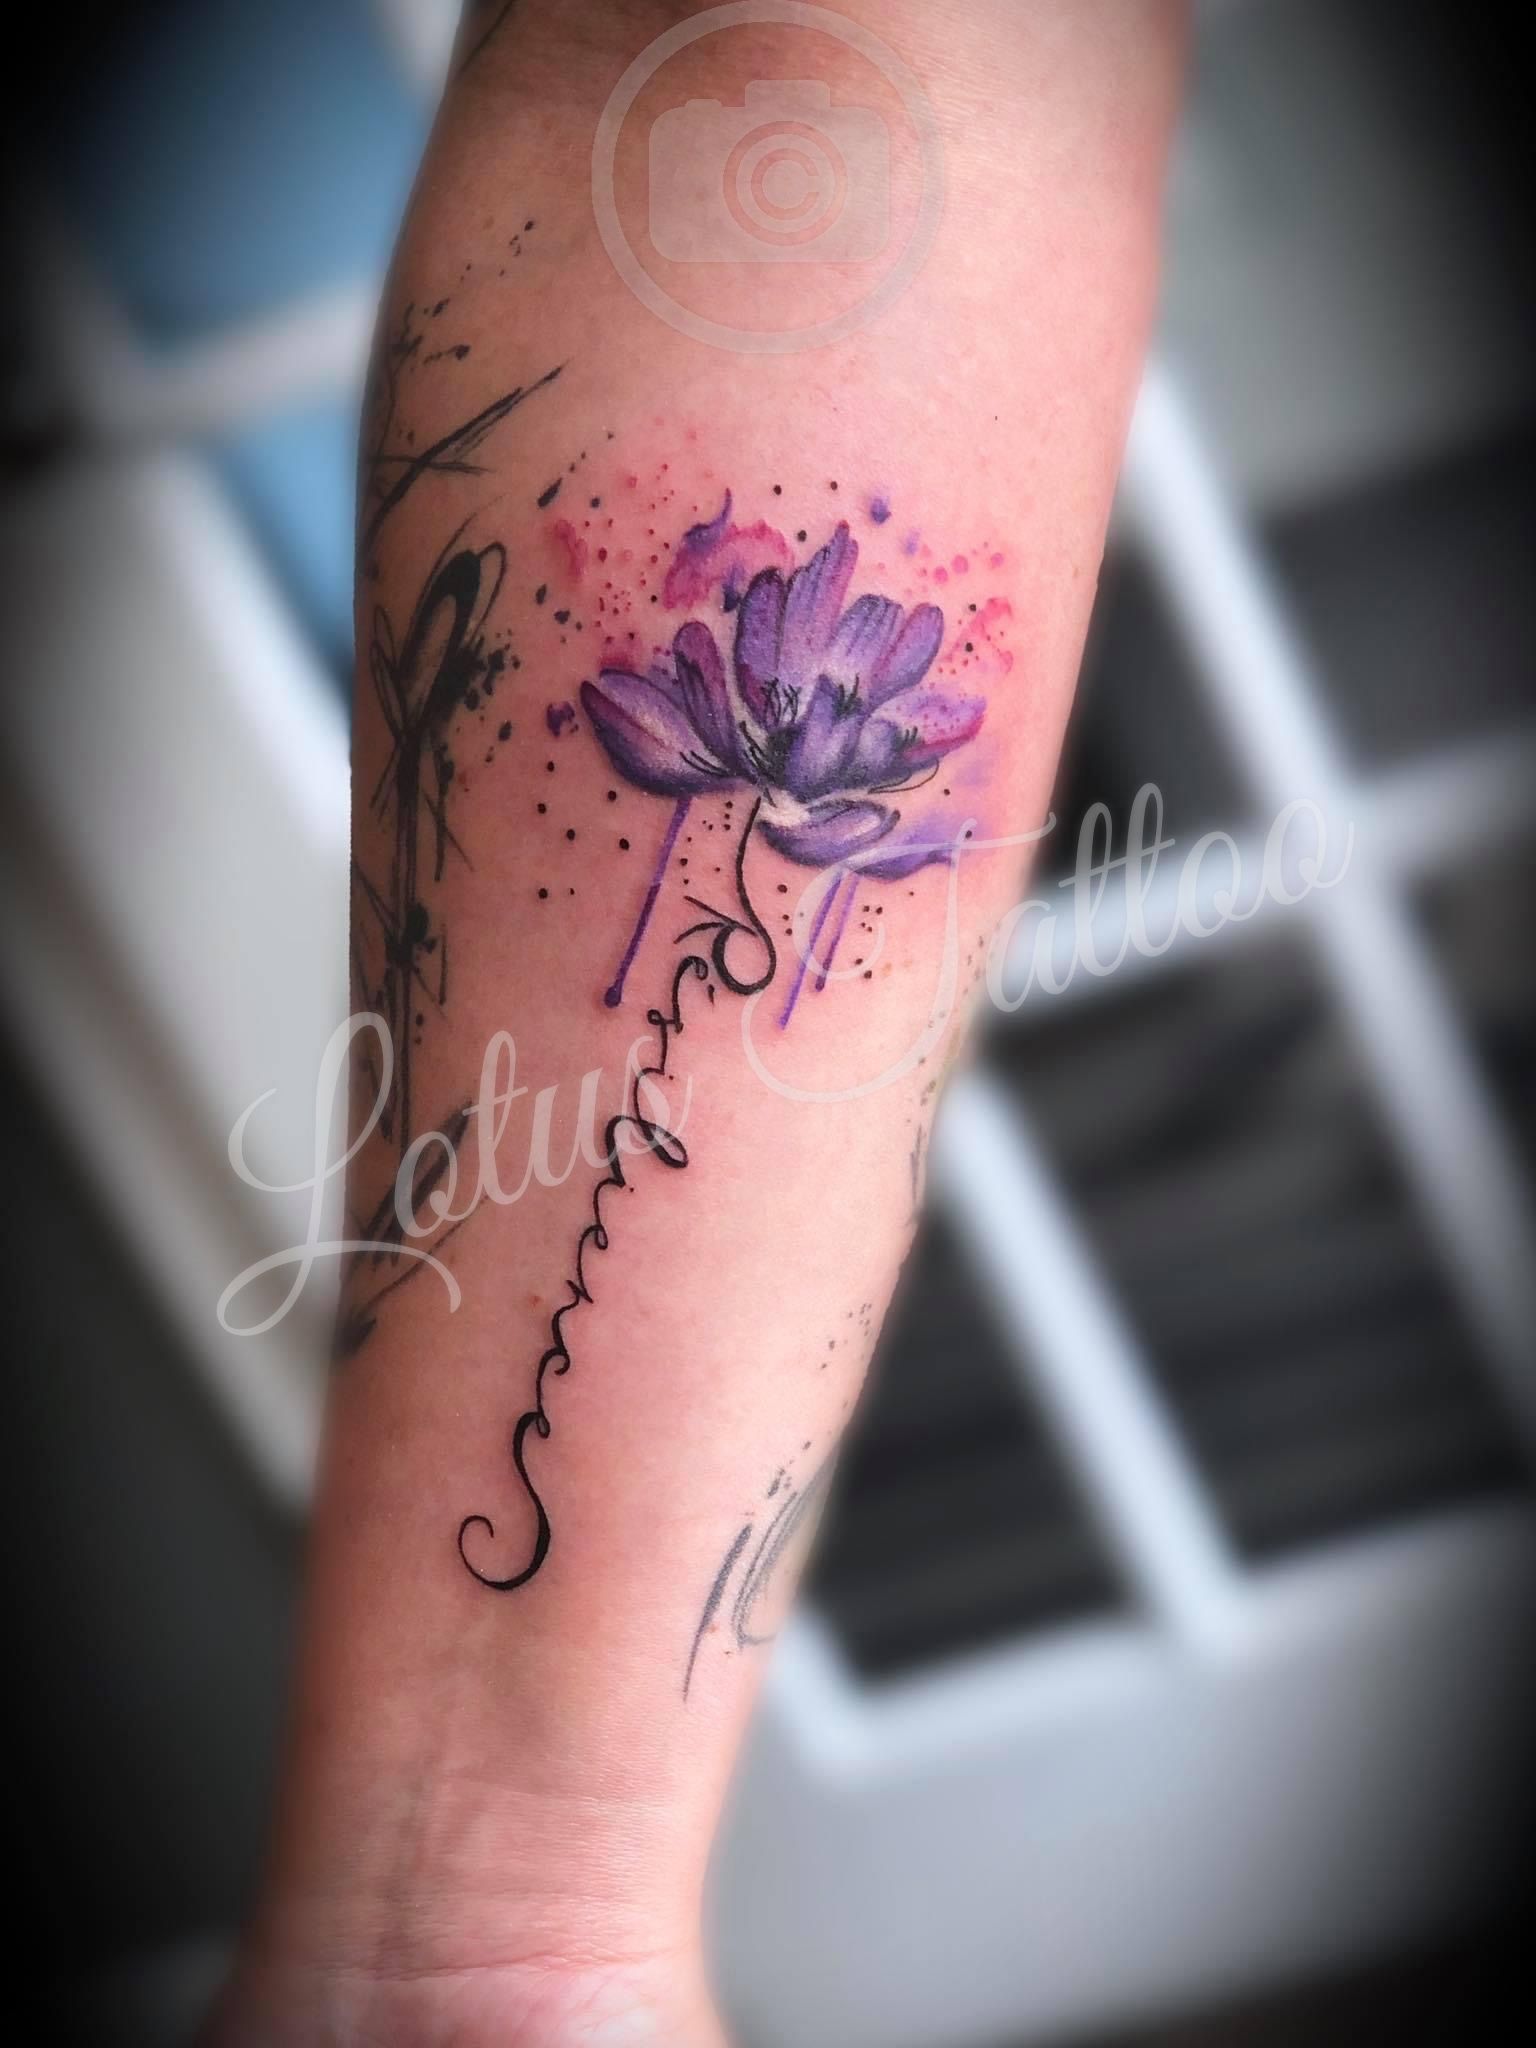 Tattoo uploaded by Claire  By lotusflower watercolor abstract  watercolortattoo lotus  Tattoodo